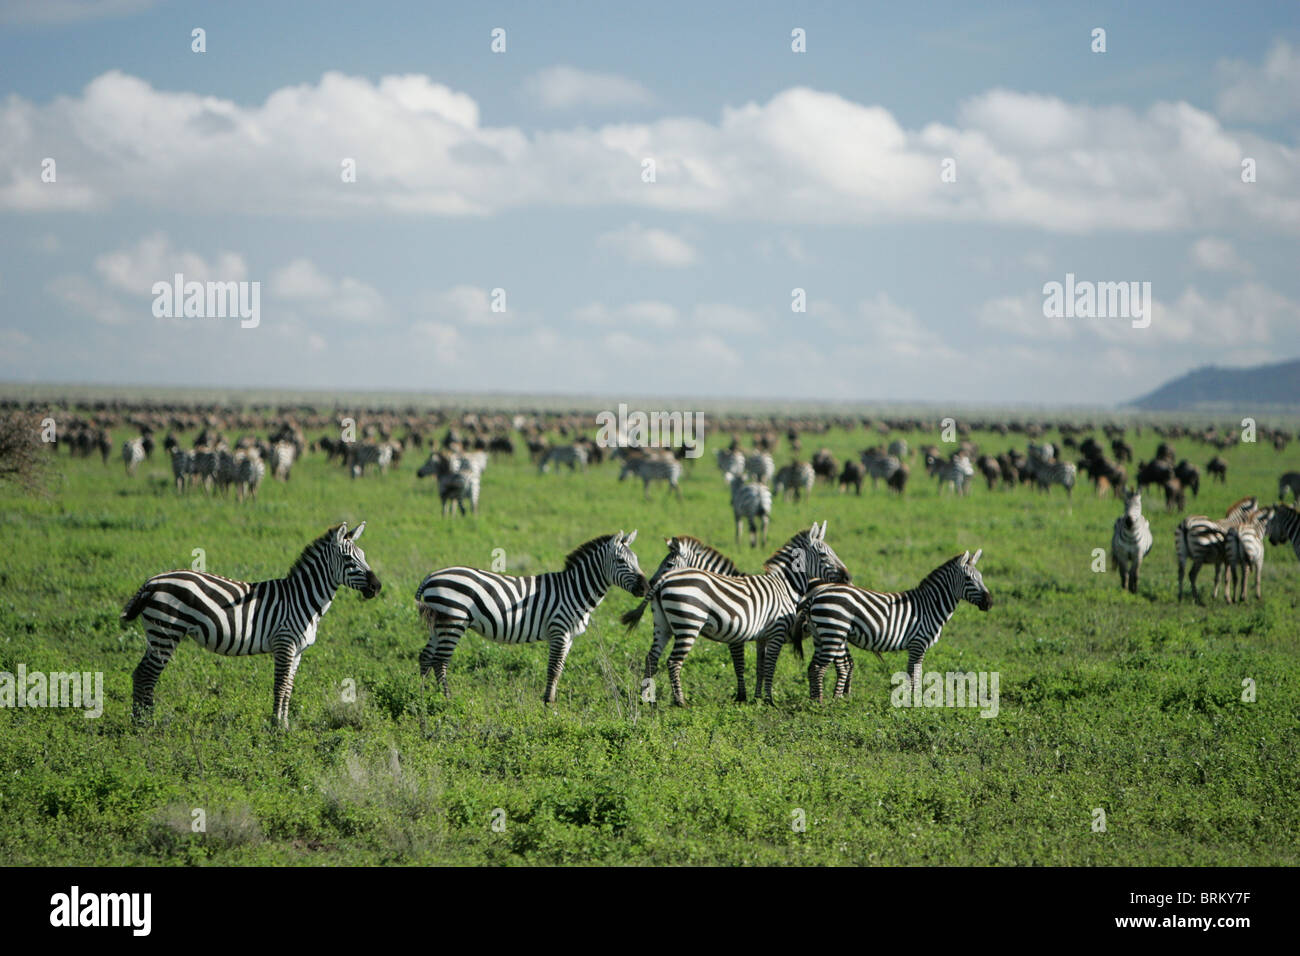 Wide angle view of Zebra and wildebeest migration on a vast grassland plain Stock Photo